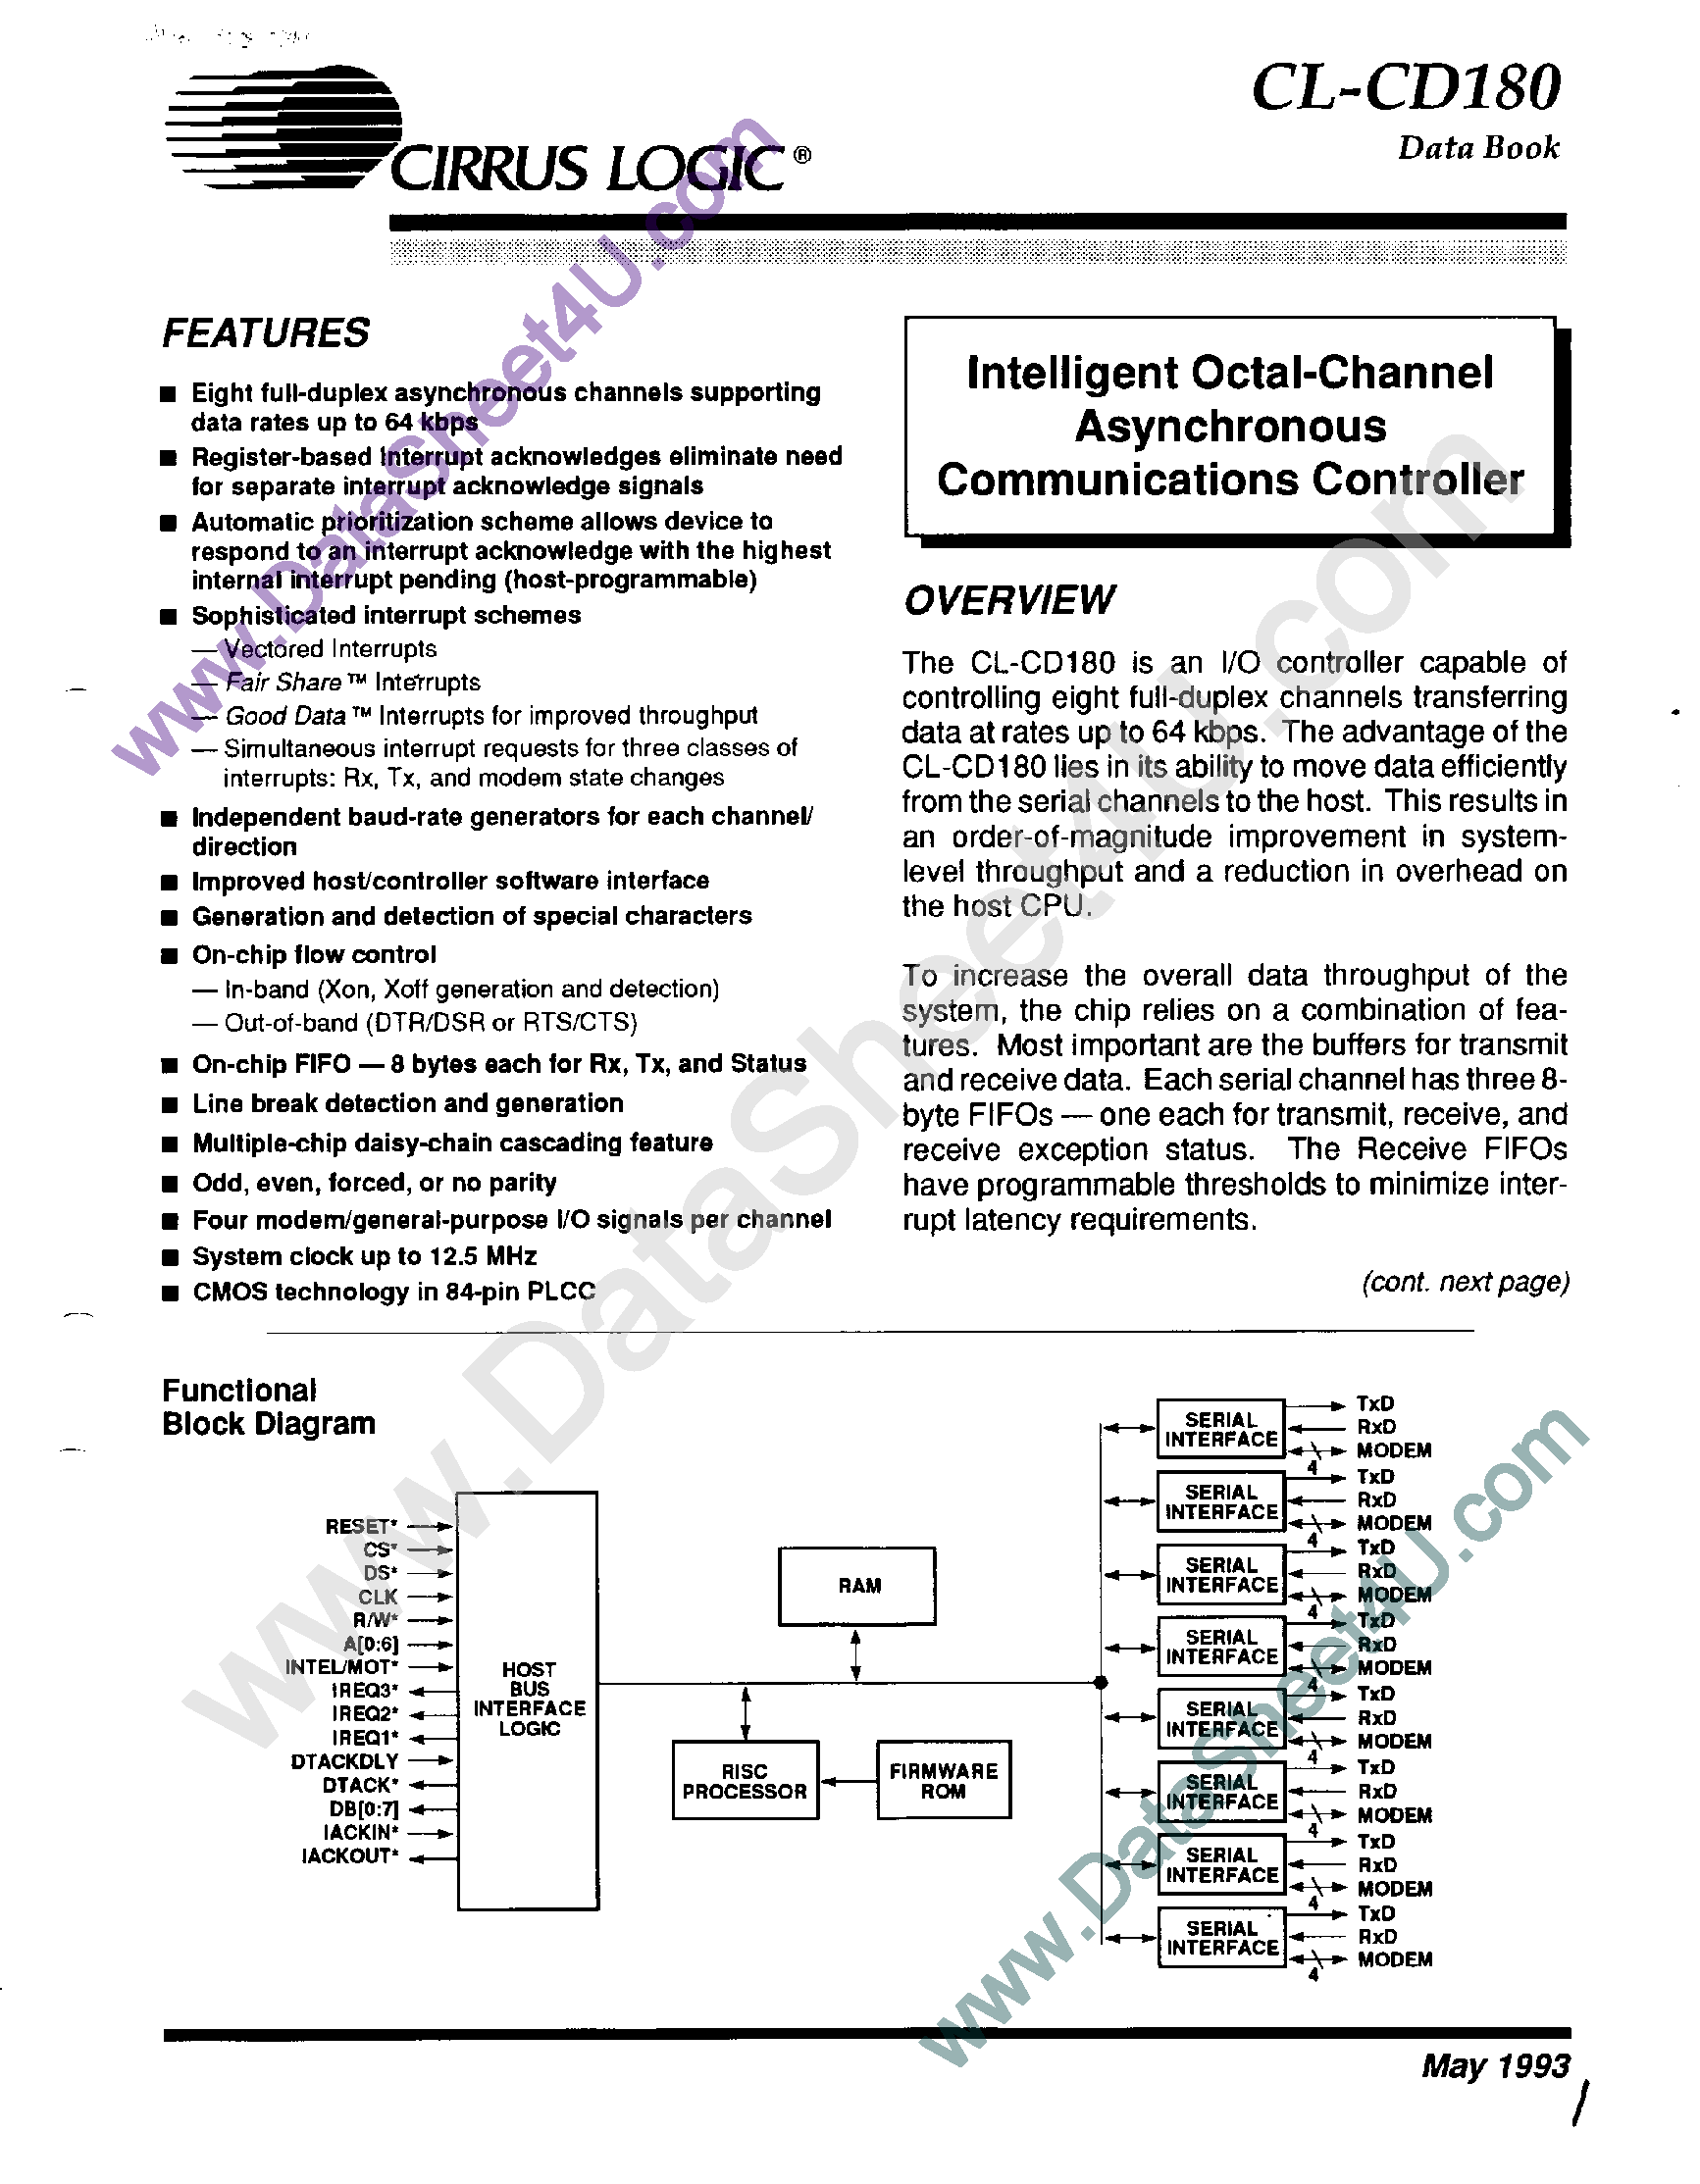 Даташит CL-CD180 - Intelligent Octal-Channel Asynchronous Communications Controller страница 1